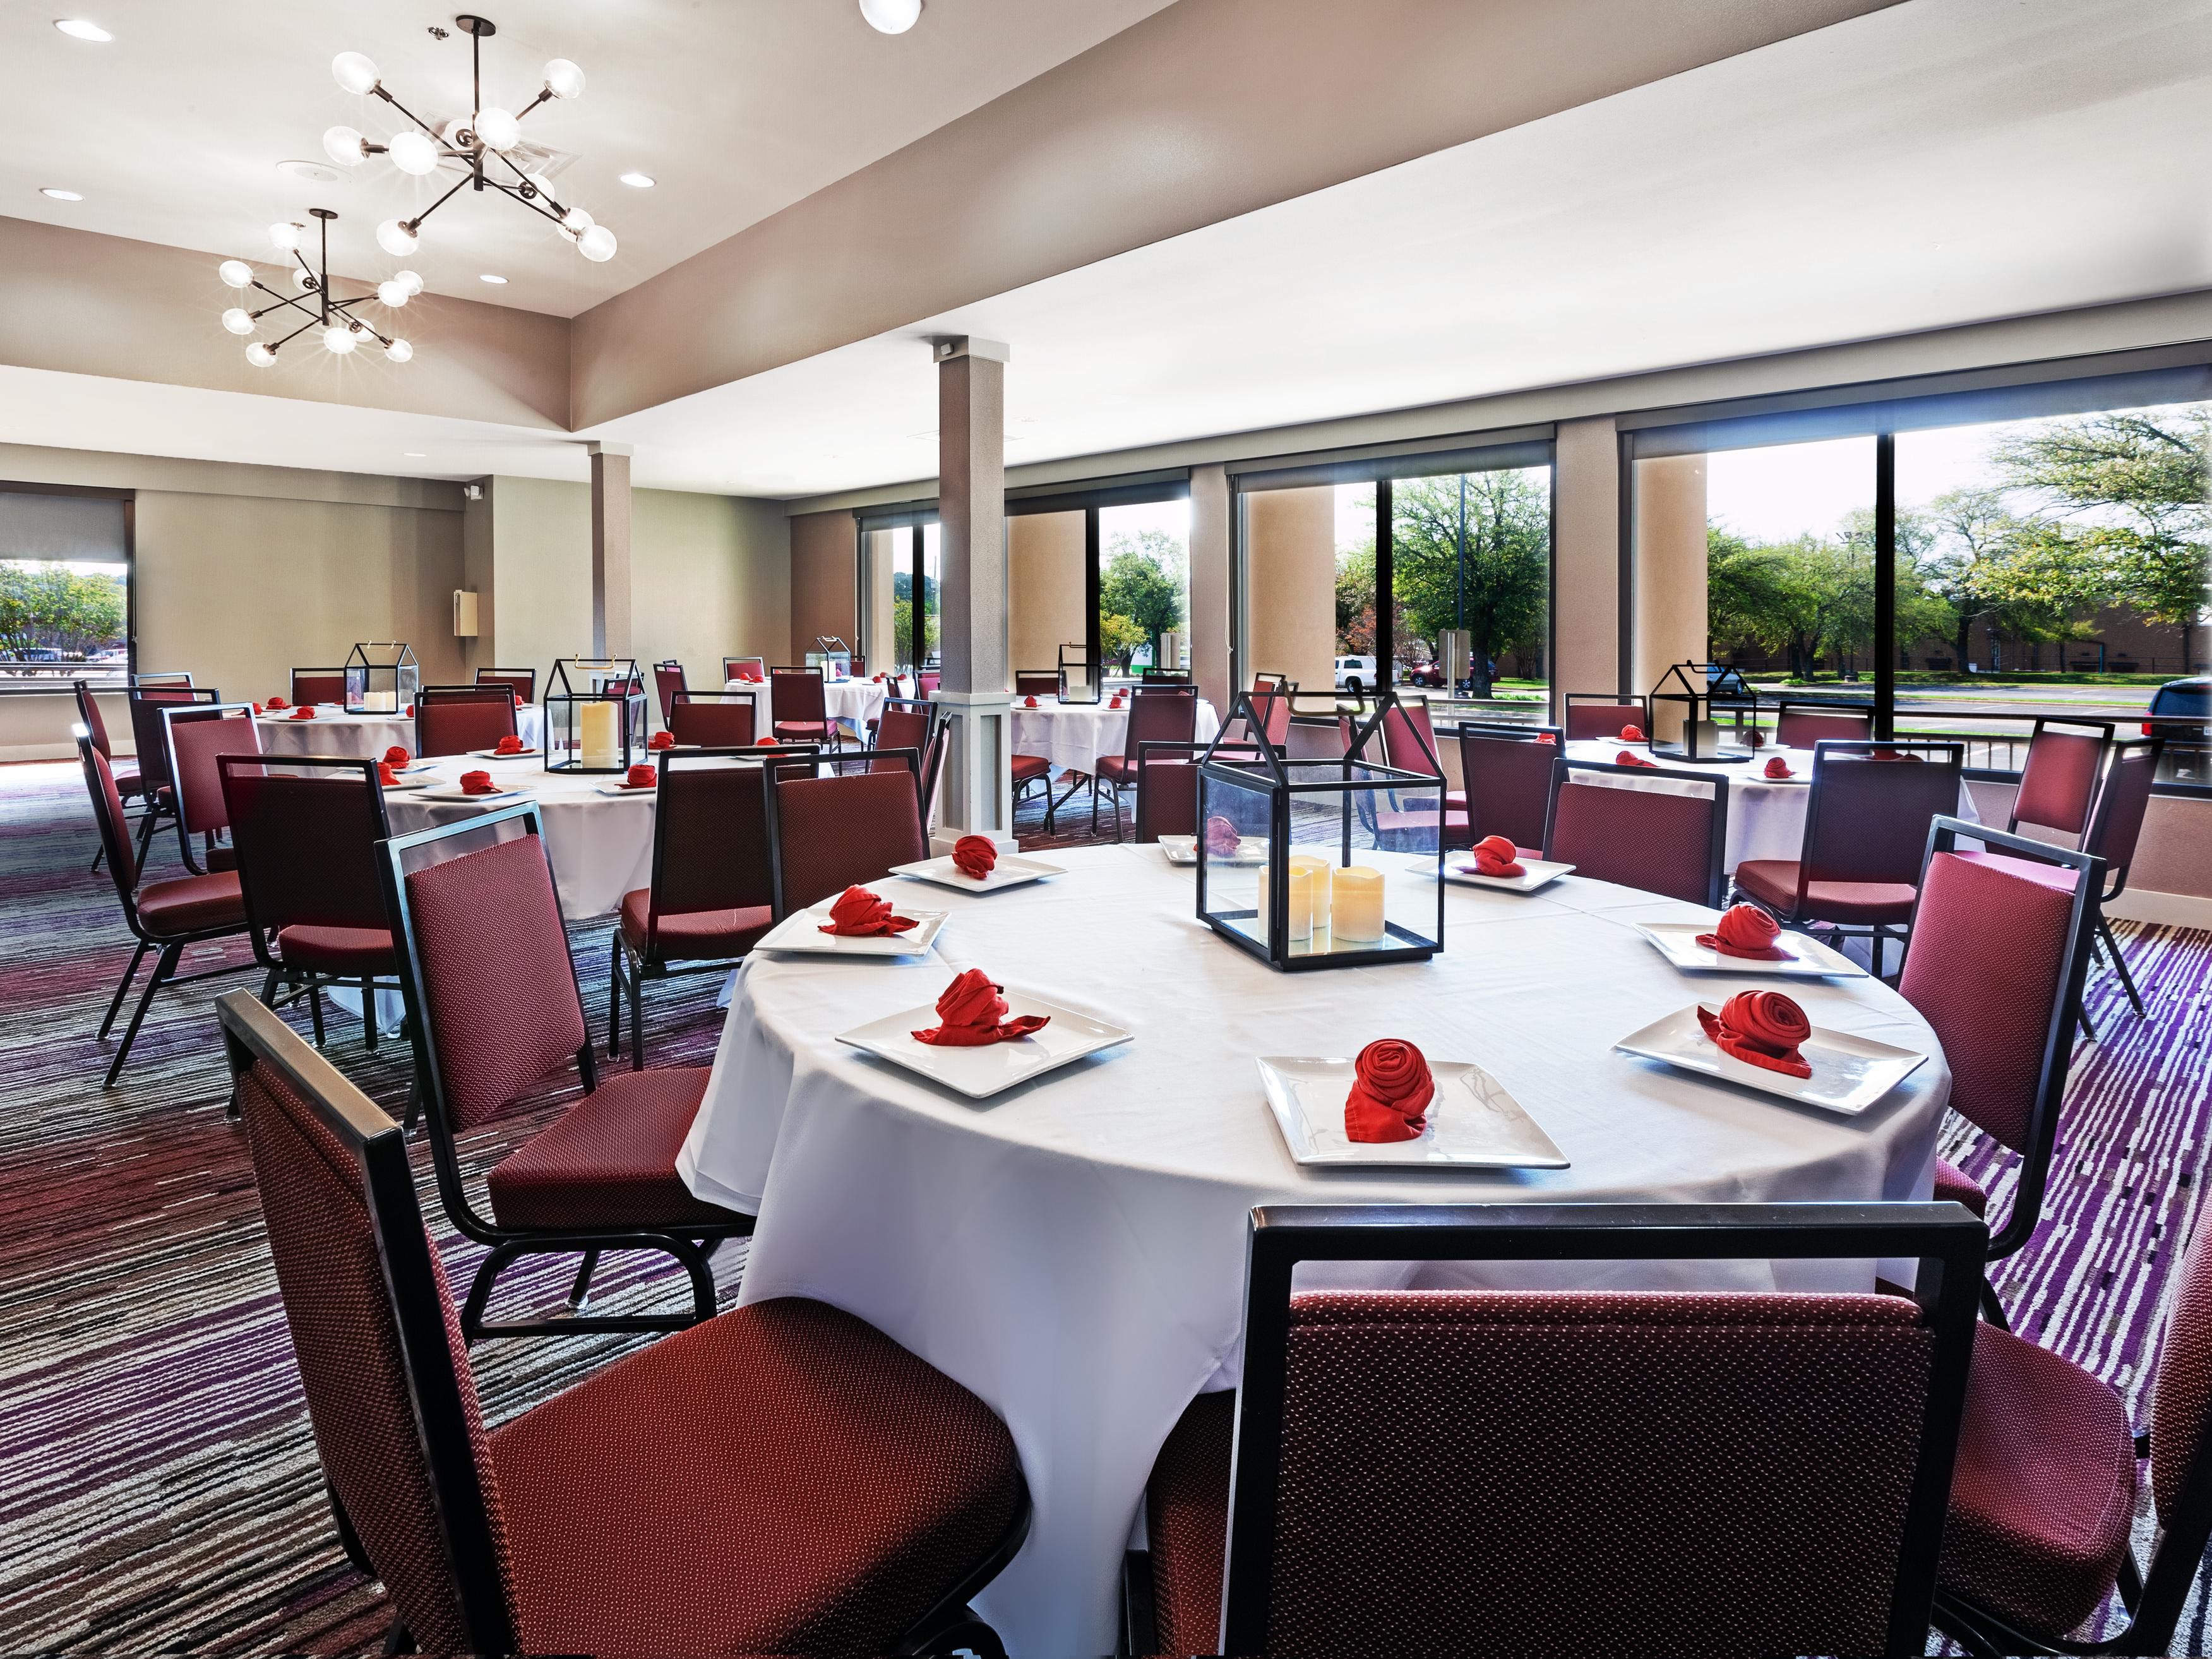 We offer over 12,000 sq. ft. of flexible meeting space - banquet space for 400, including 2 boardrooms and 5 breakout rooms. Perfect for conferences, small gatherings, business meetings, and so much more! Please note that we are following all CDC and state/local social distancing guidelines.